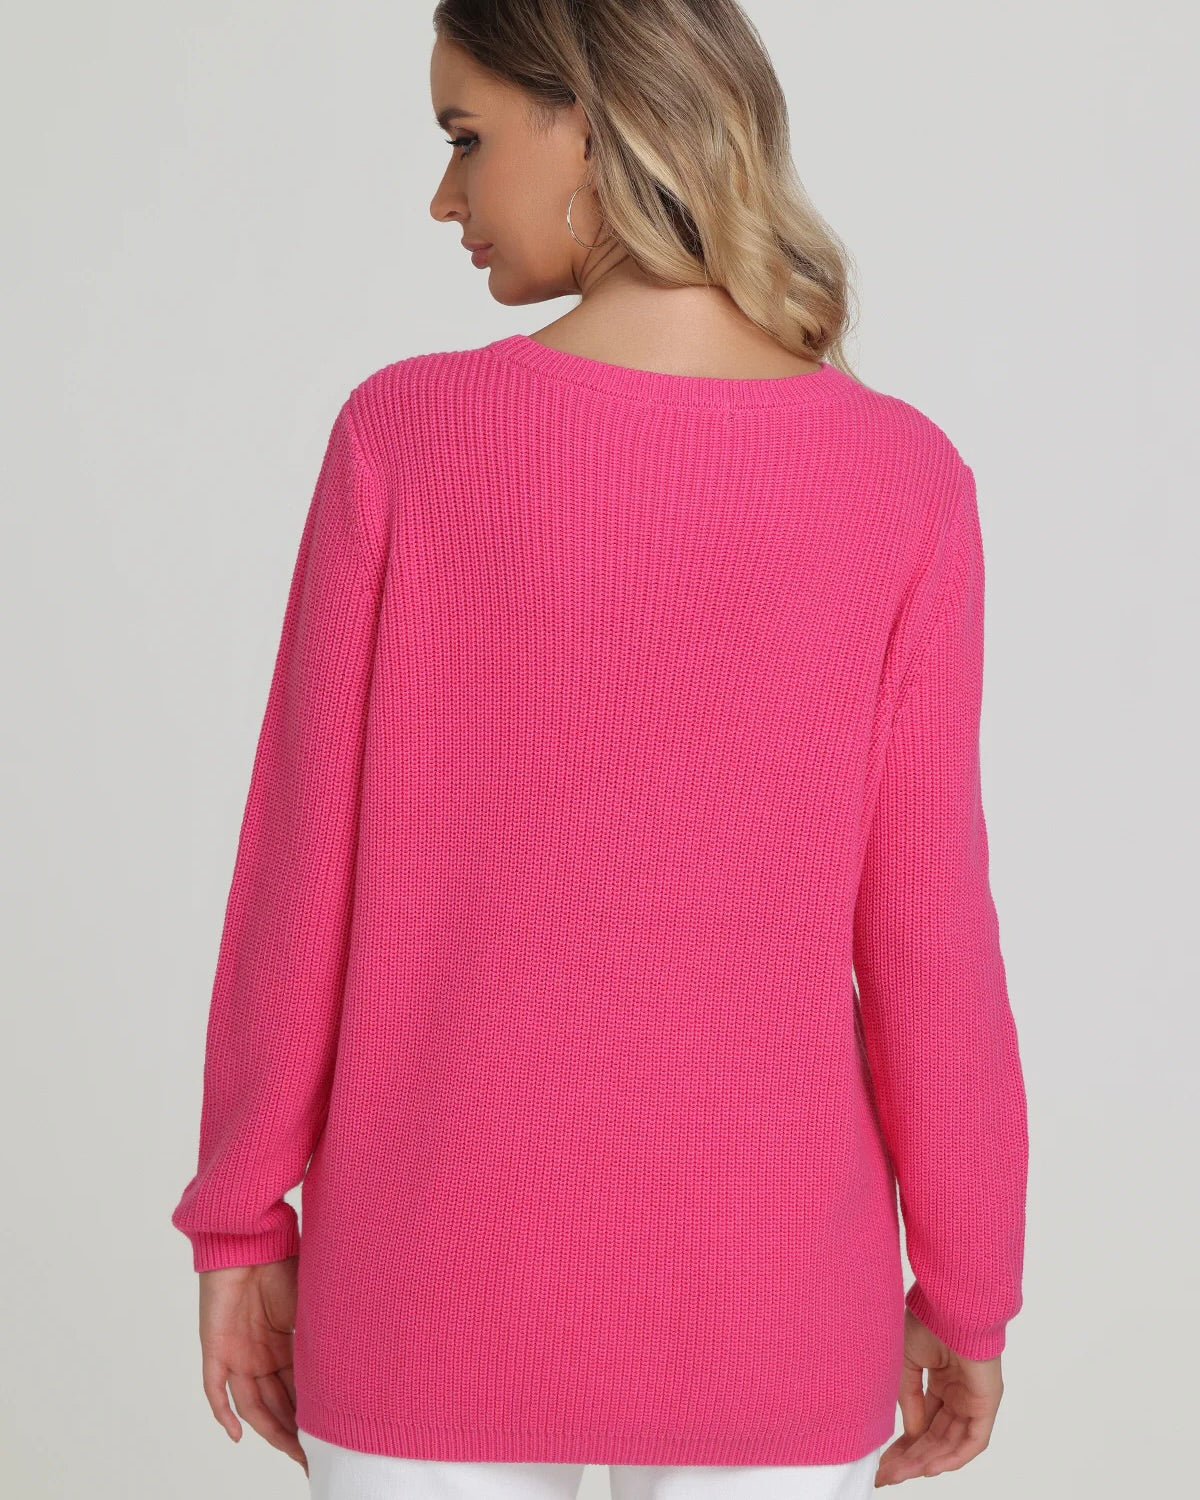 Model wearing 525 America Emma Crewneck Shaker Stitch Sweater in shocking pink color wearing white pants on a white background